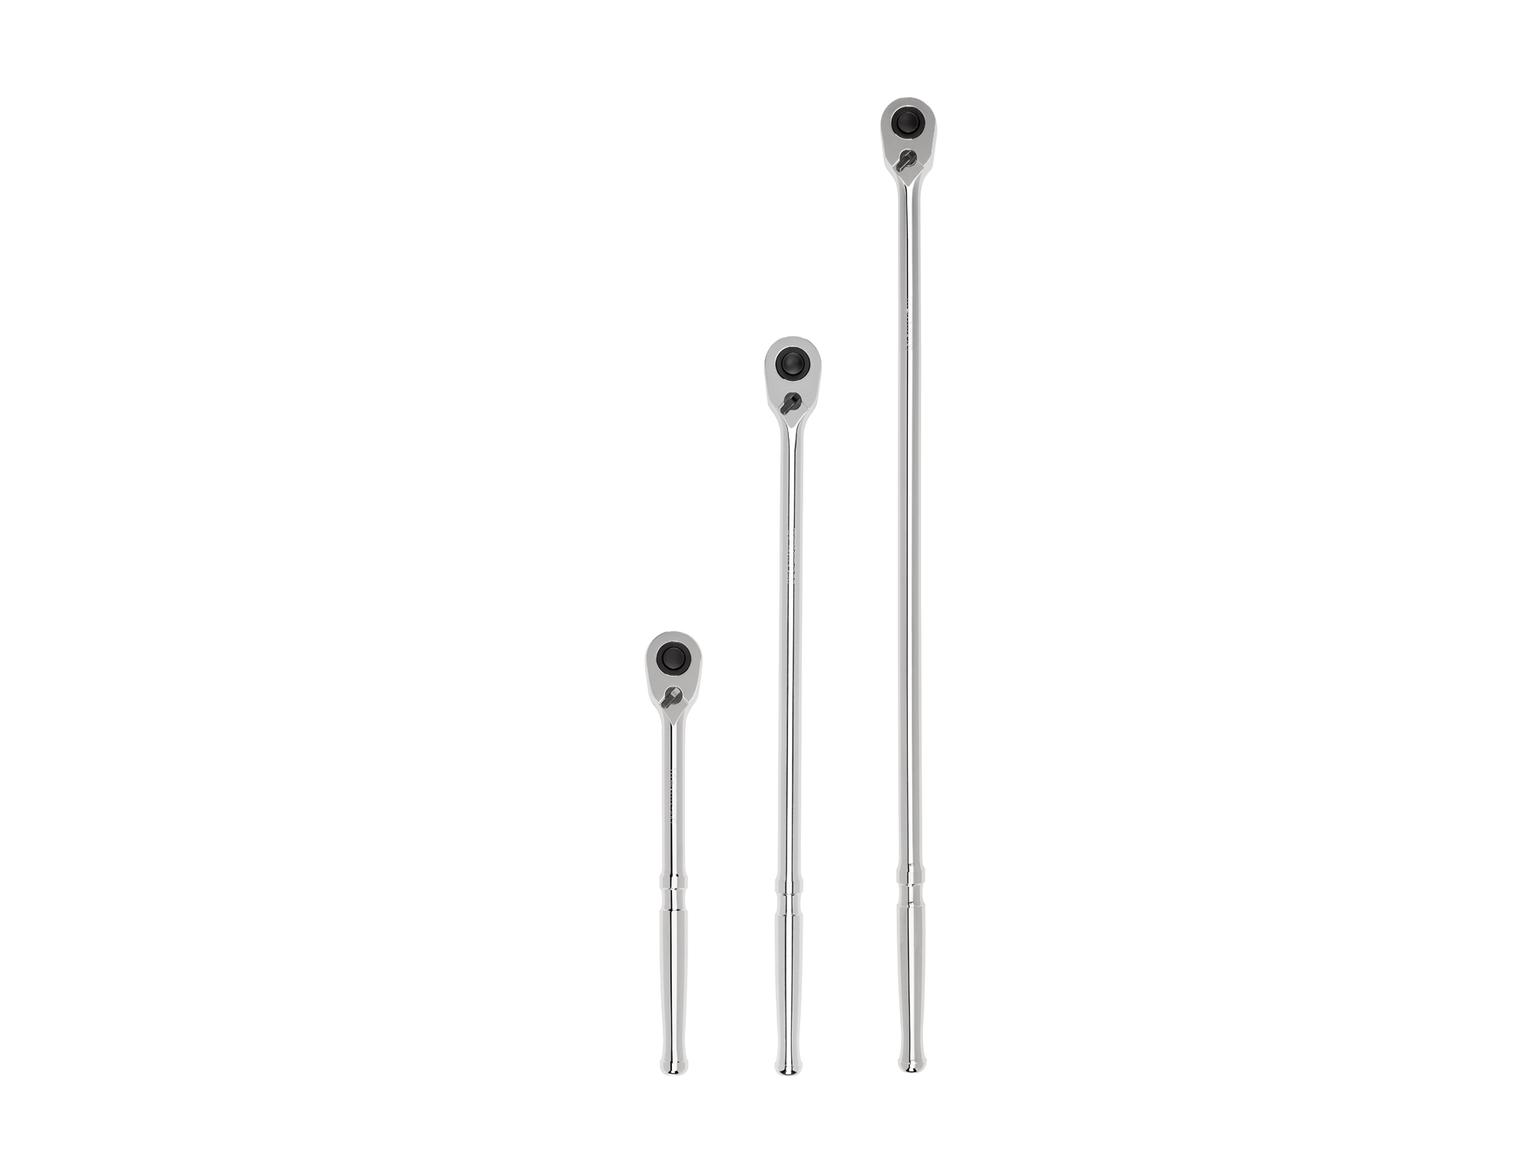 TEKTON SRH92104-T 1/2 Inch Drive Quick-Release Ratchet Set, 3-Piece (10-1/2, 18, 24 in.)